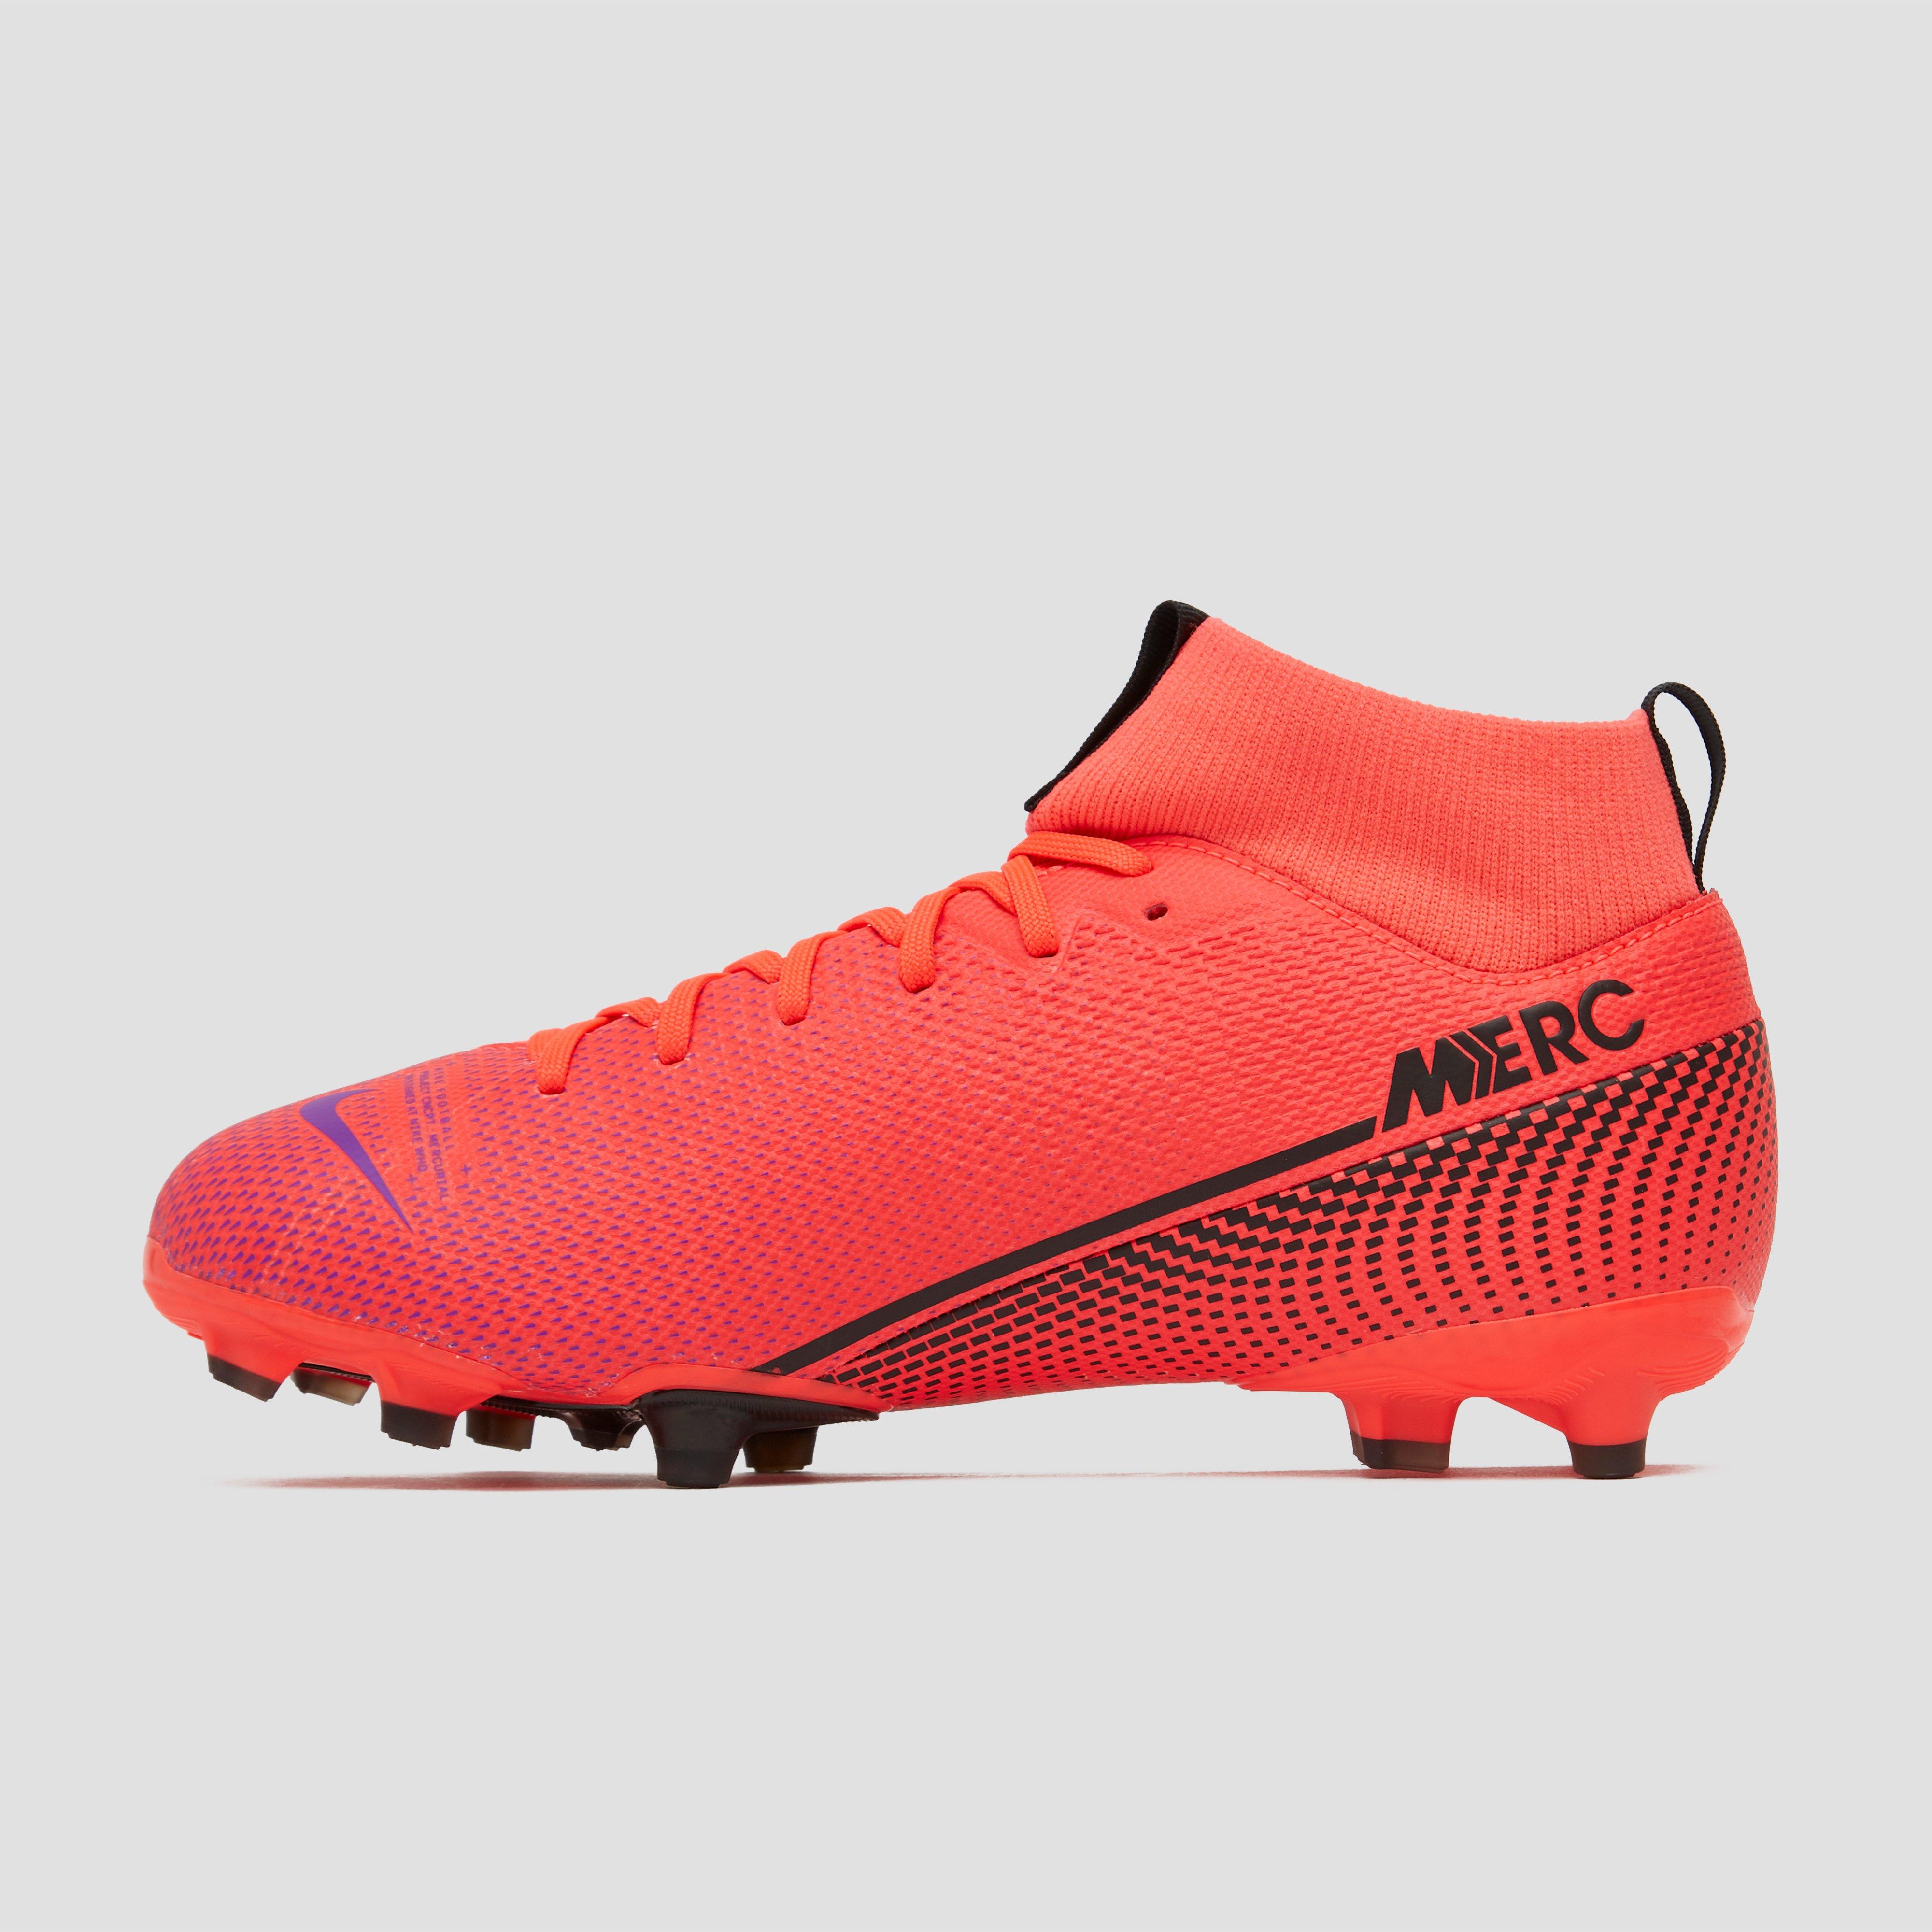 Football Boots Nike Mercurial Superfly VII Academy MDS Turf.